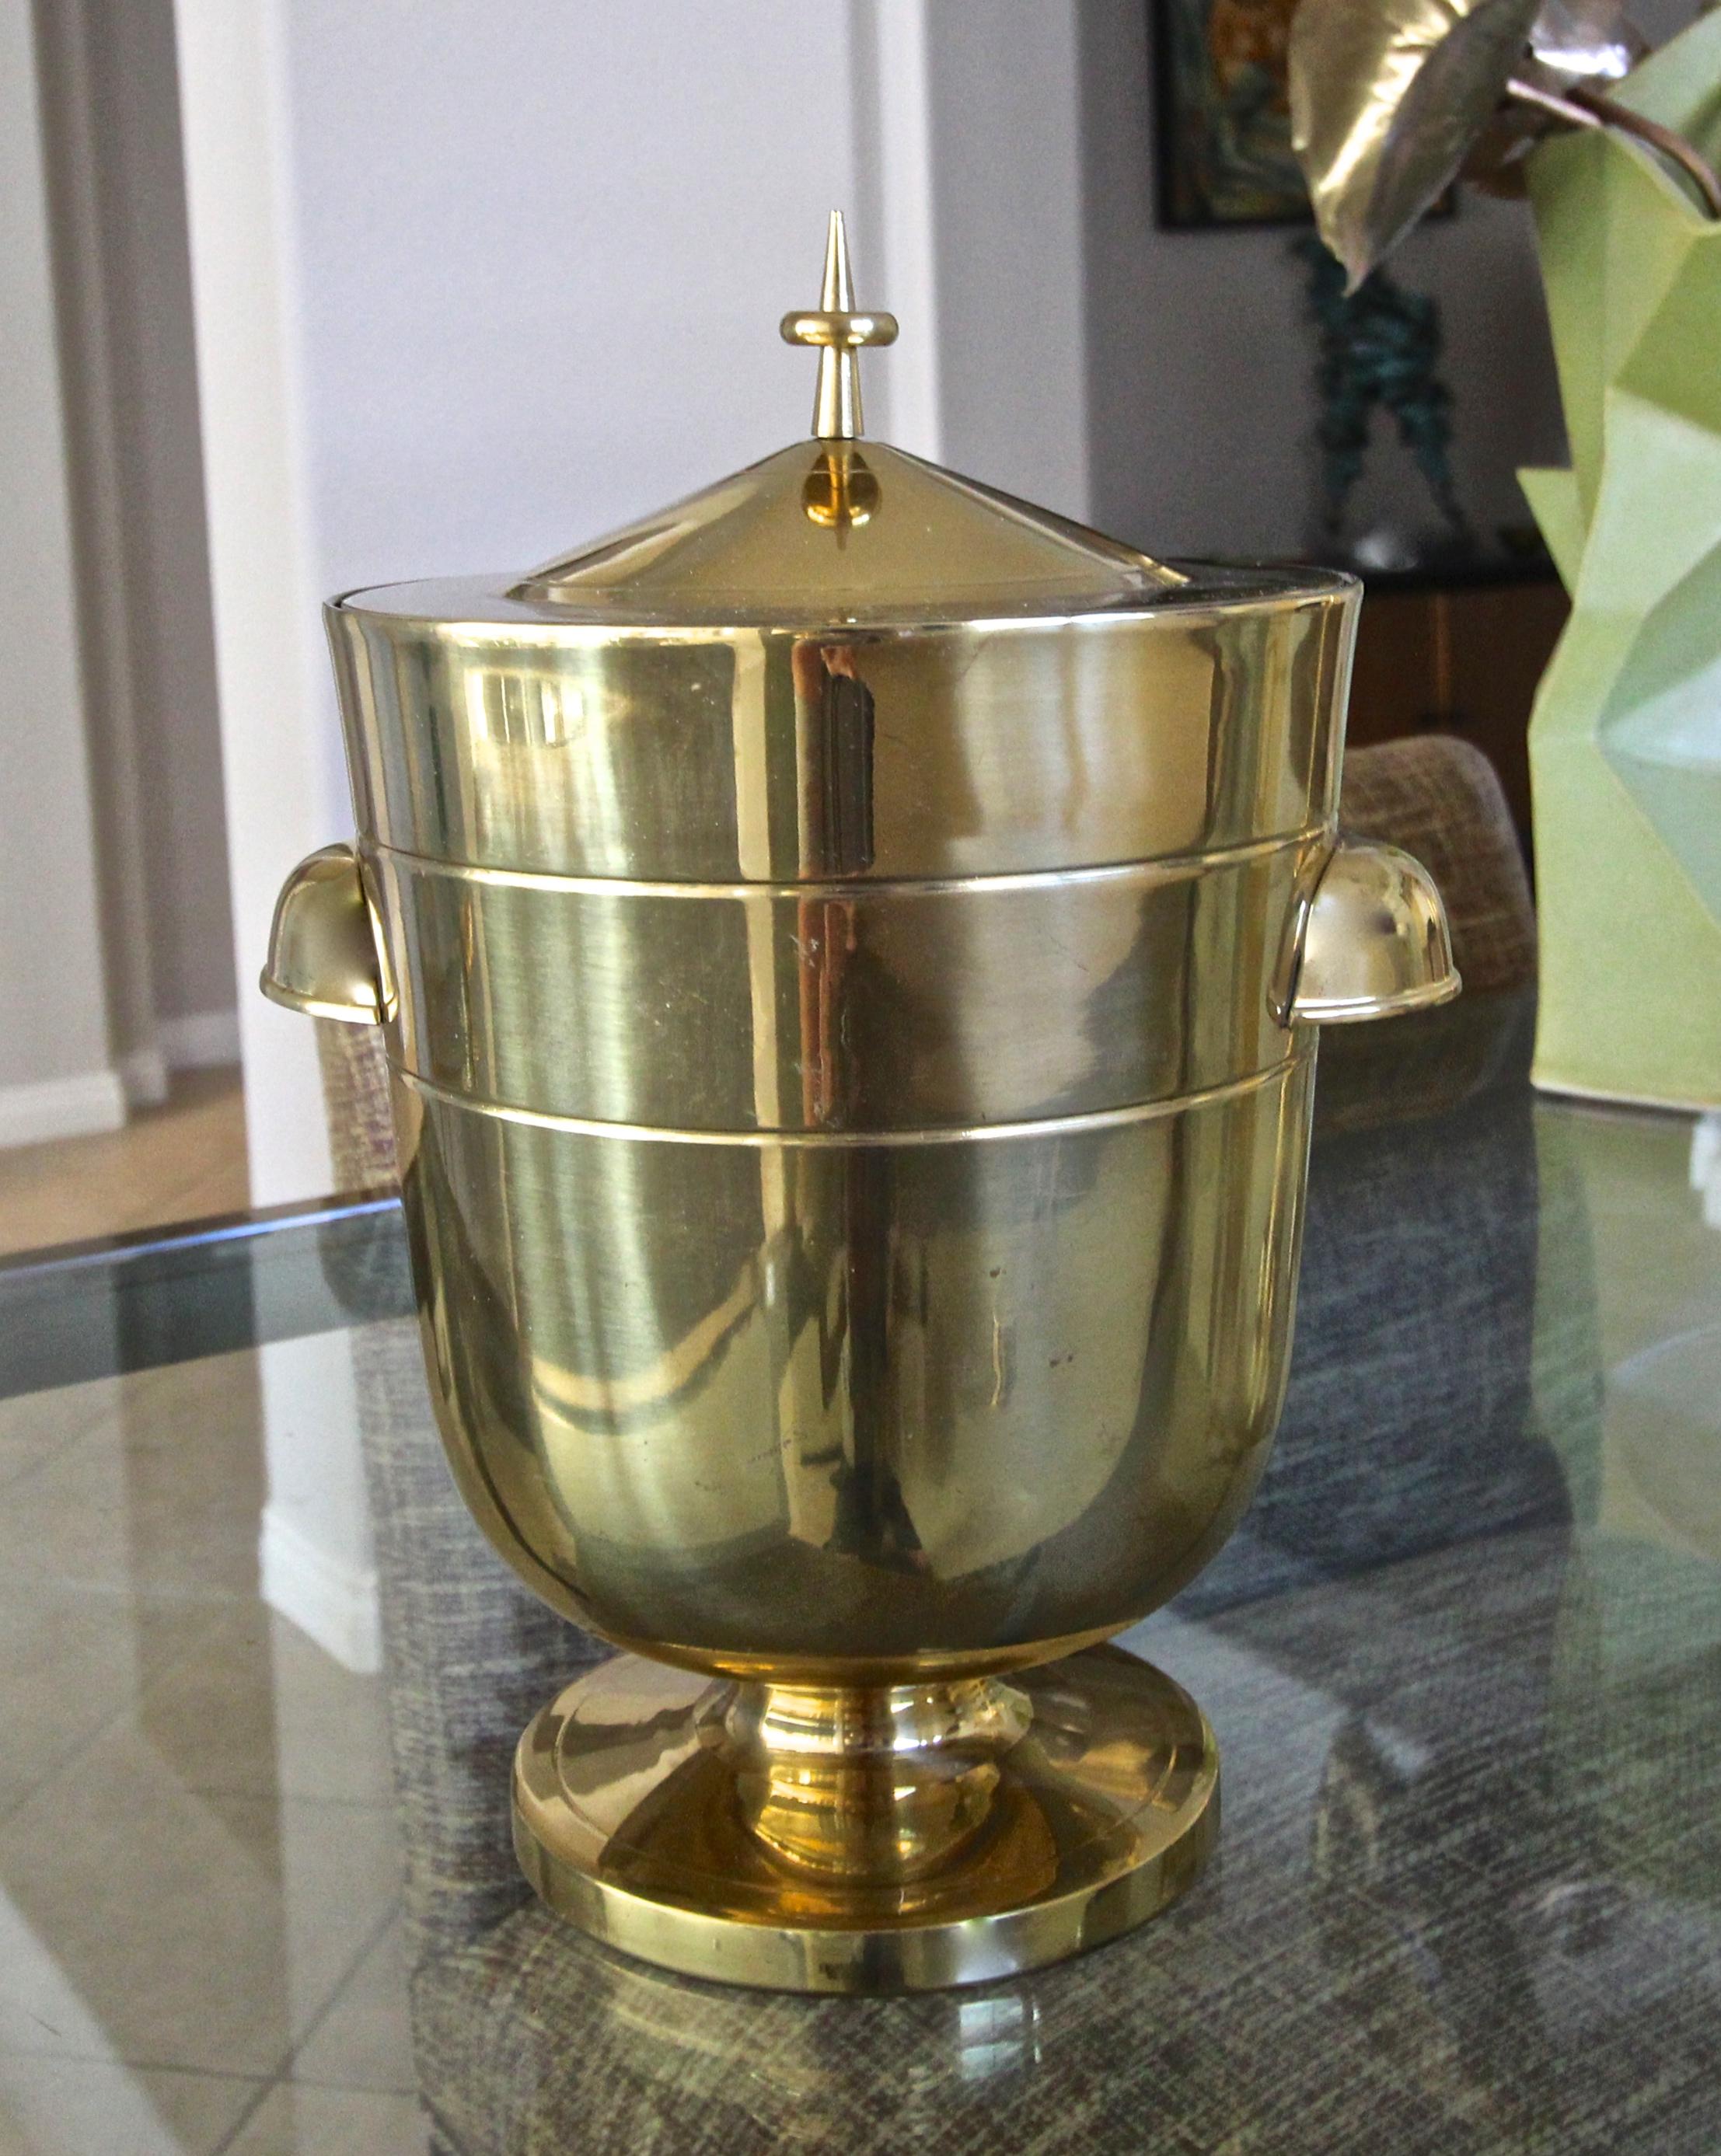 A fine lacquered brass lidded ice bucket or champagne cooler designed by Tommi Parzinger, including ice tongs. The ice bucket is in original almost new untouched condition. Stamped 